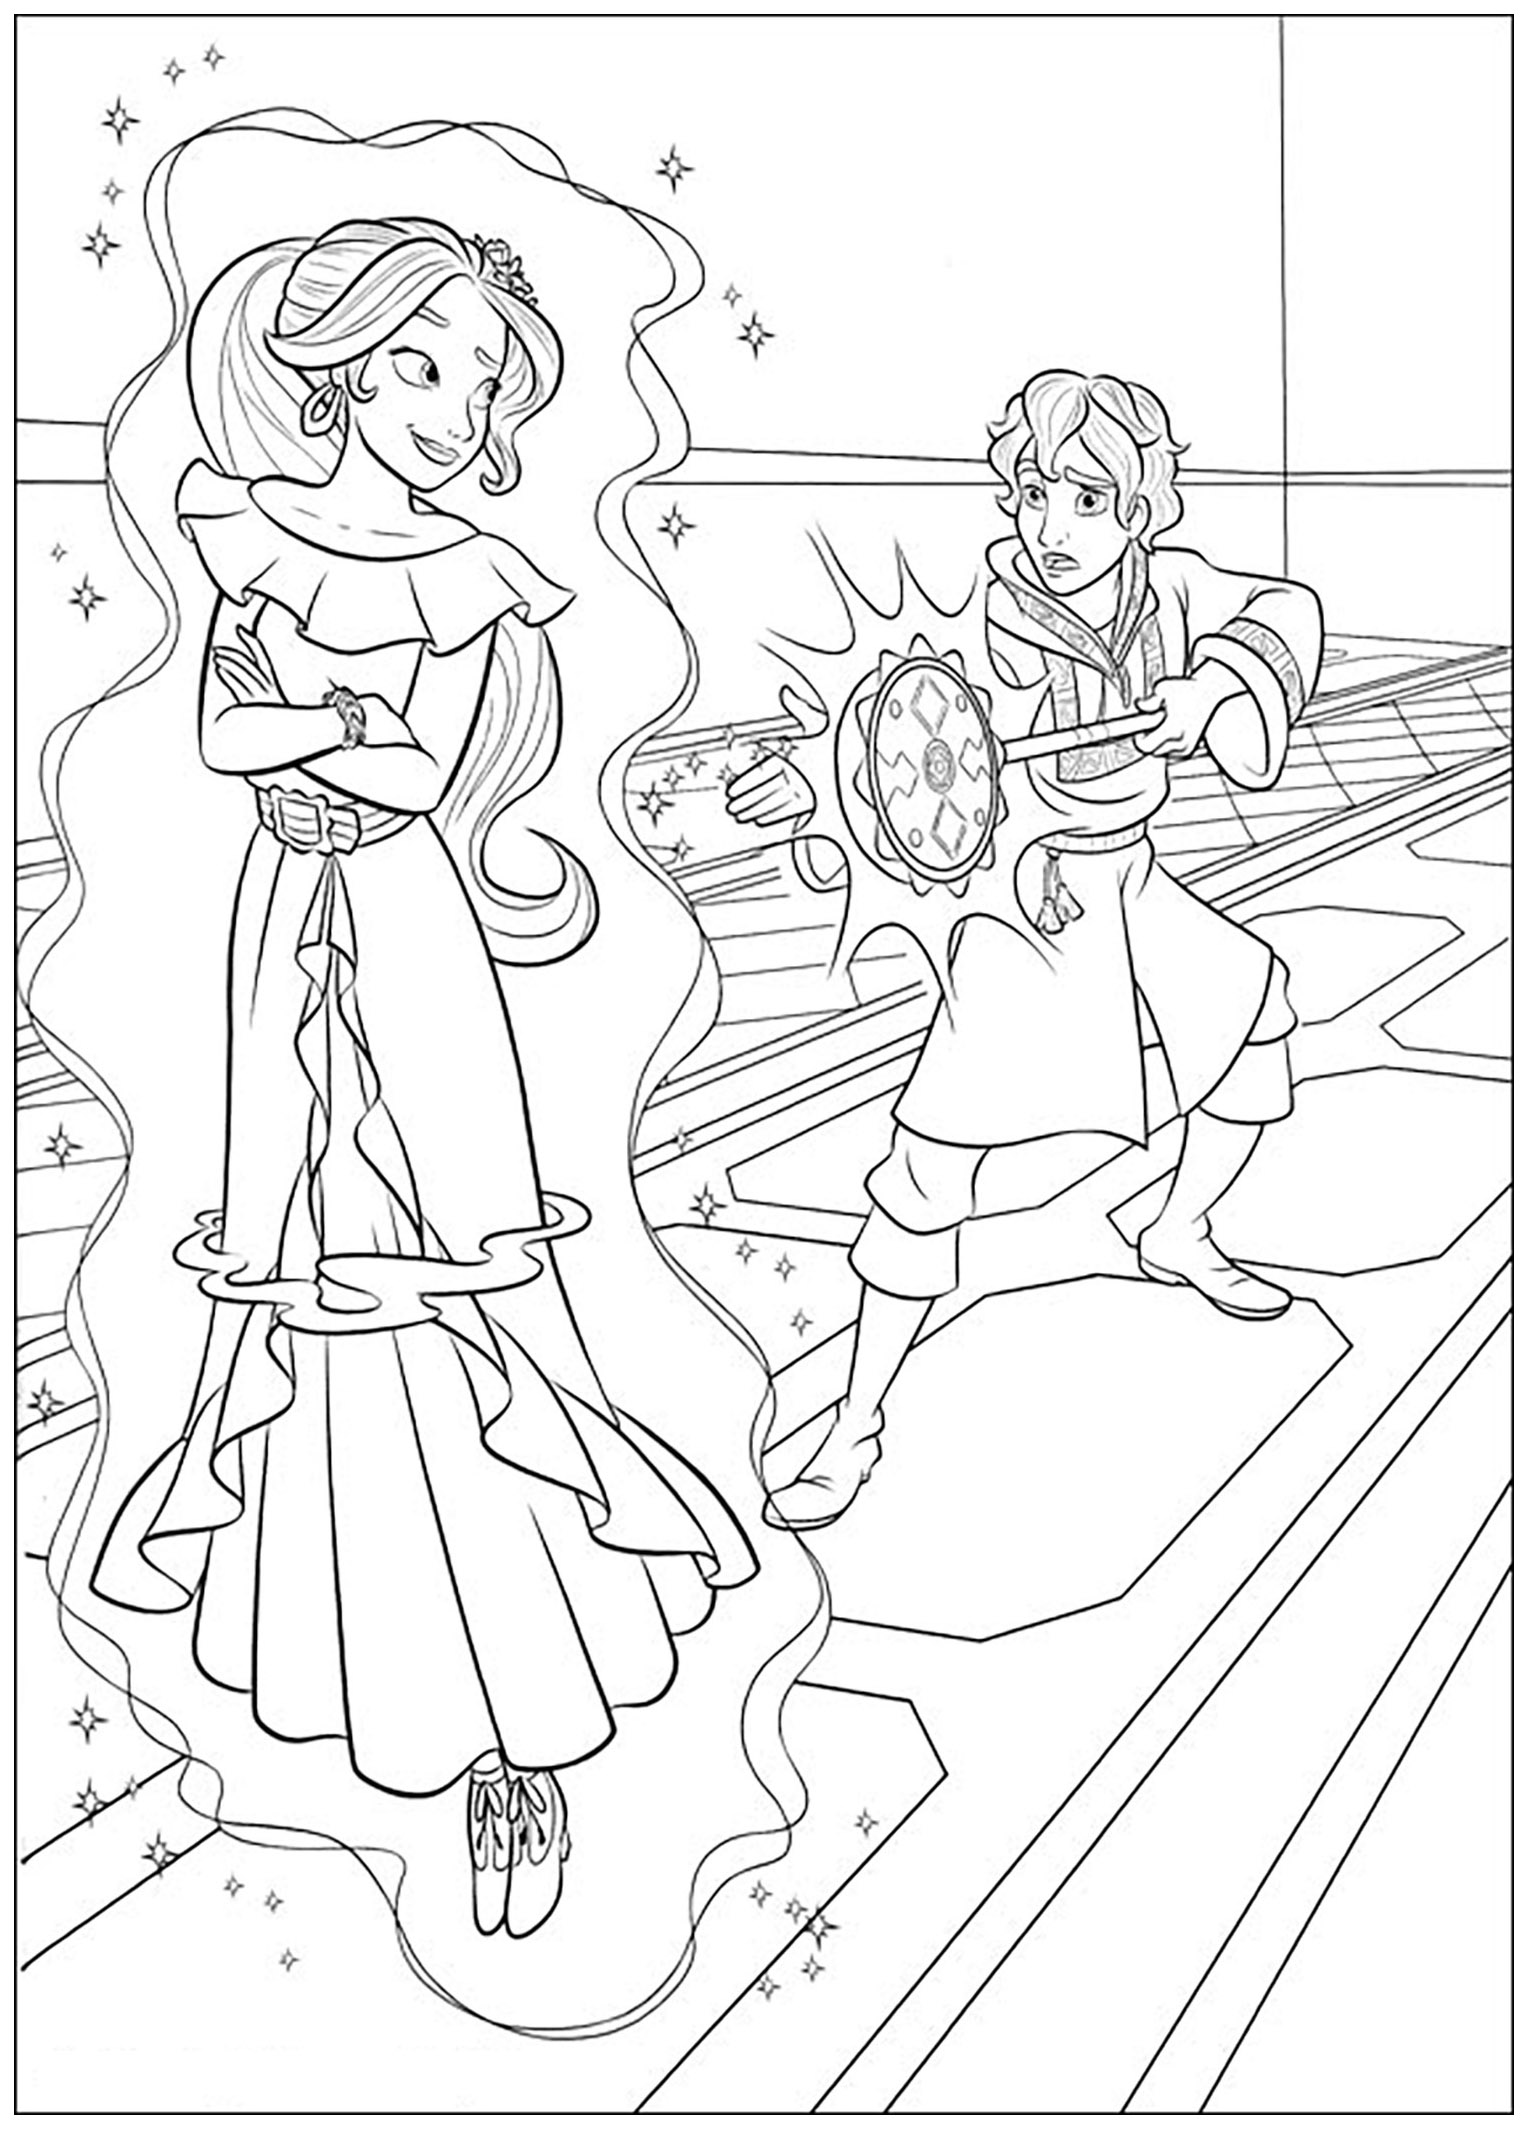 Fun coloring page of Elena Avalor to print and color